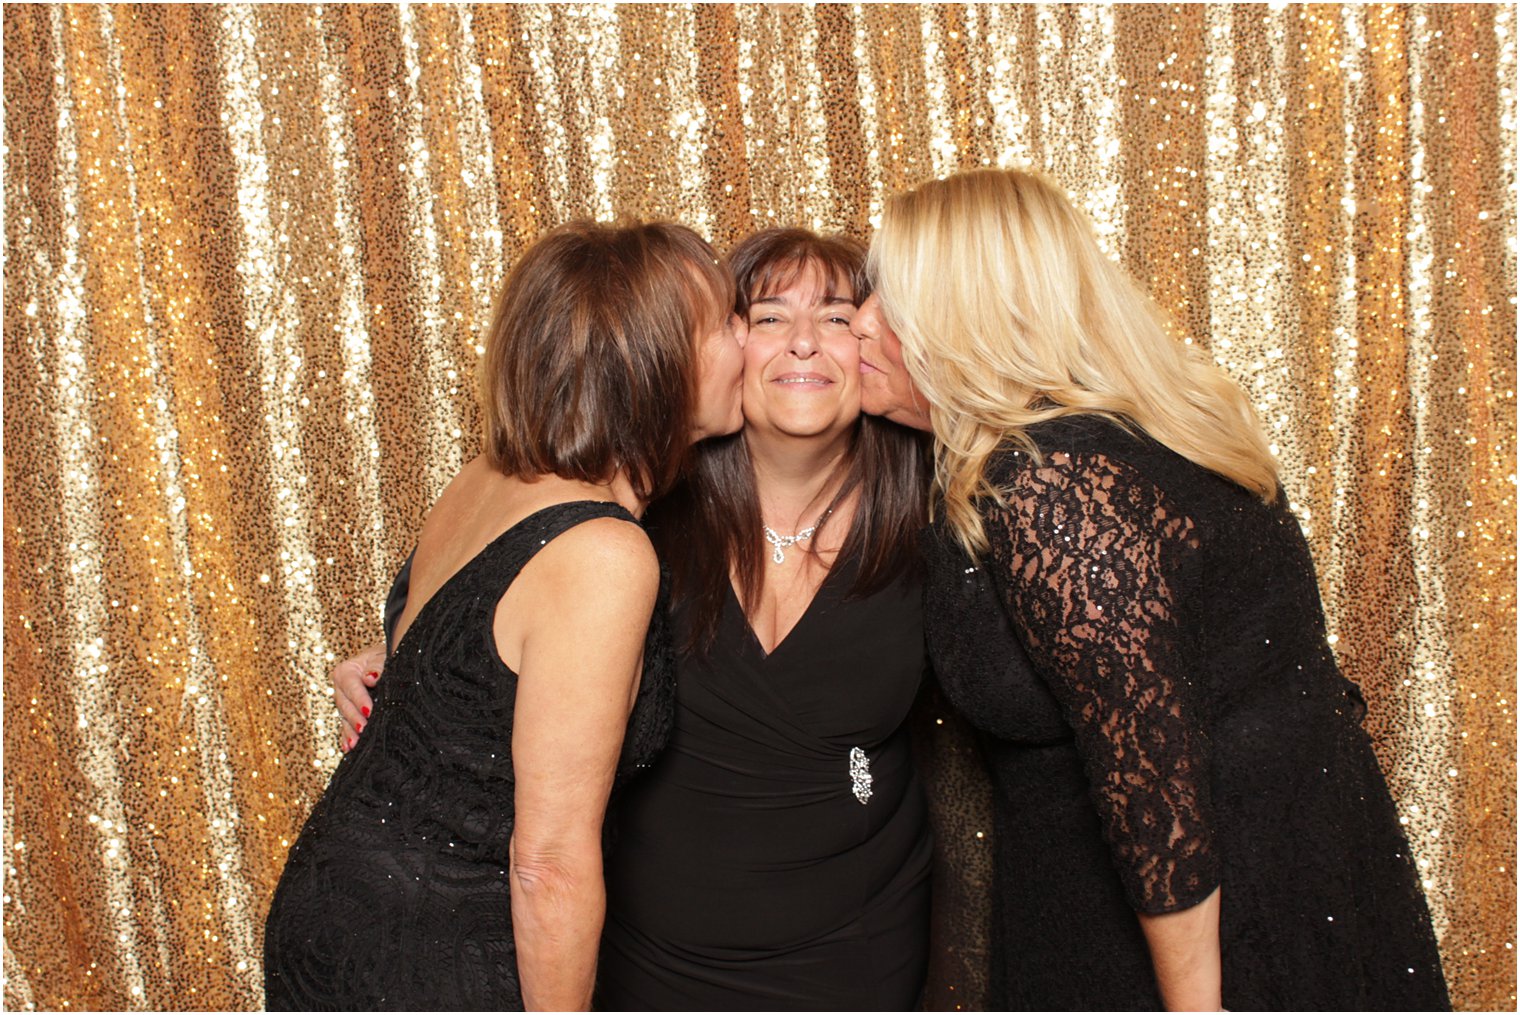 women kiss sister during photo booth 